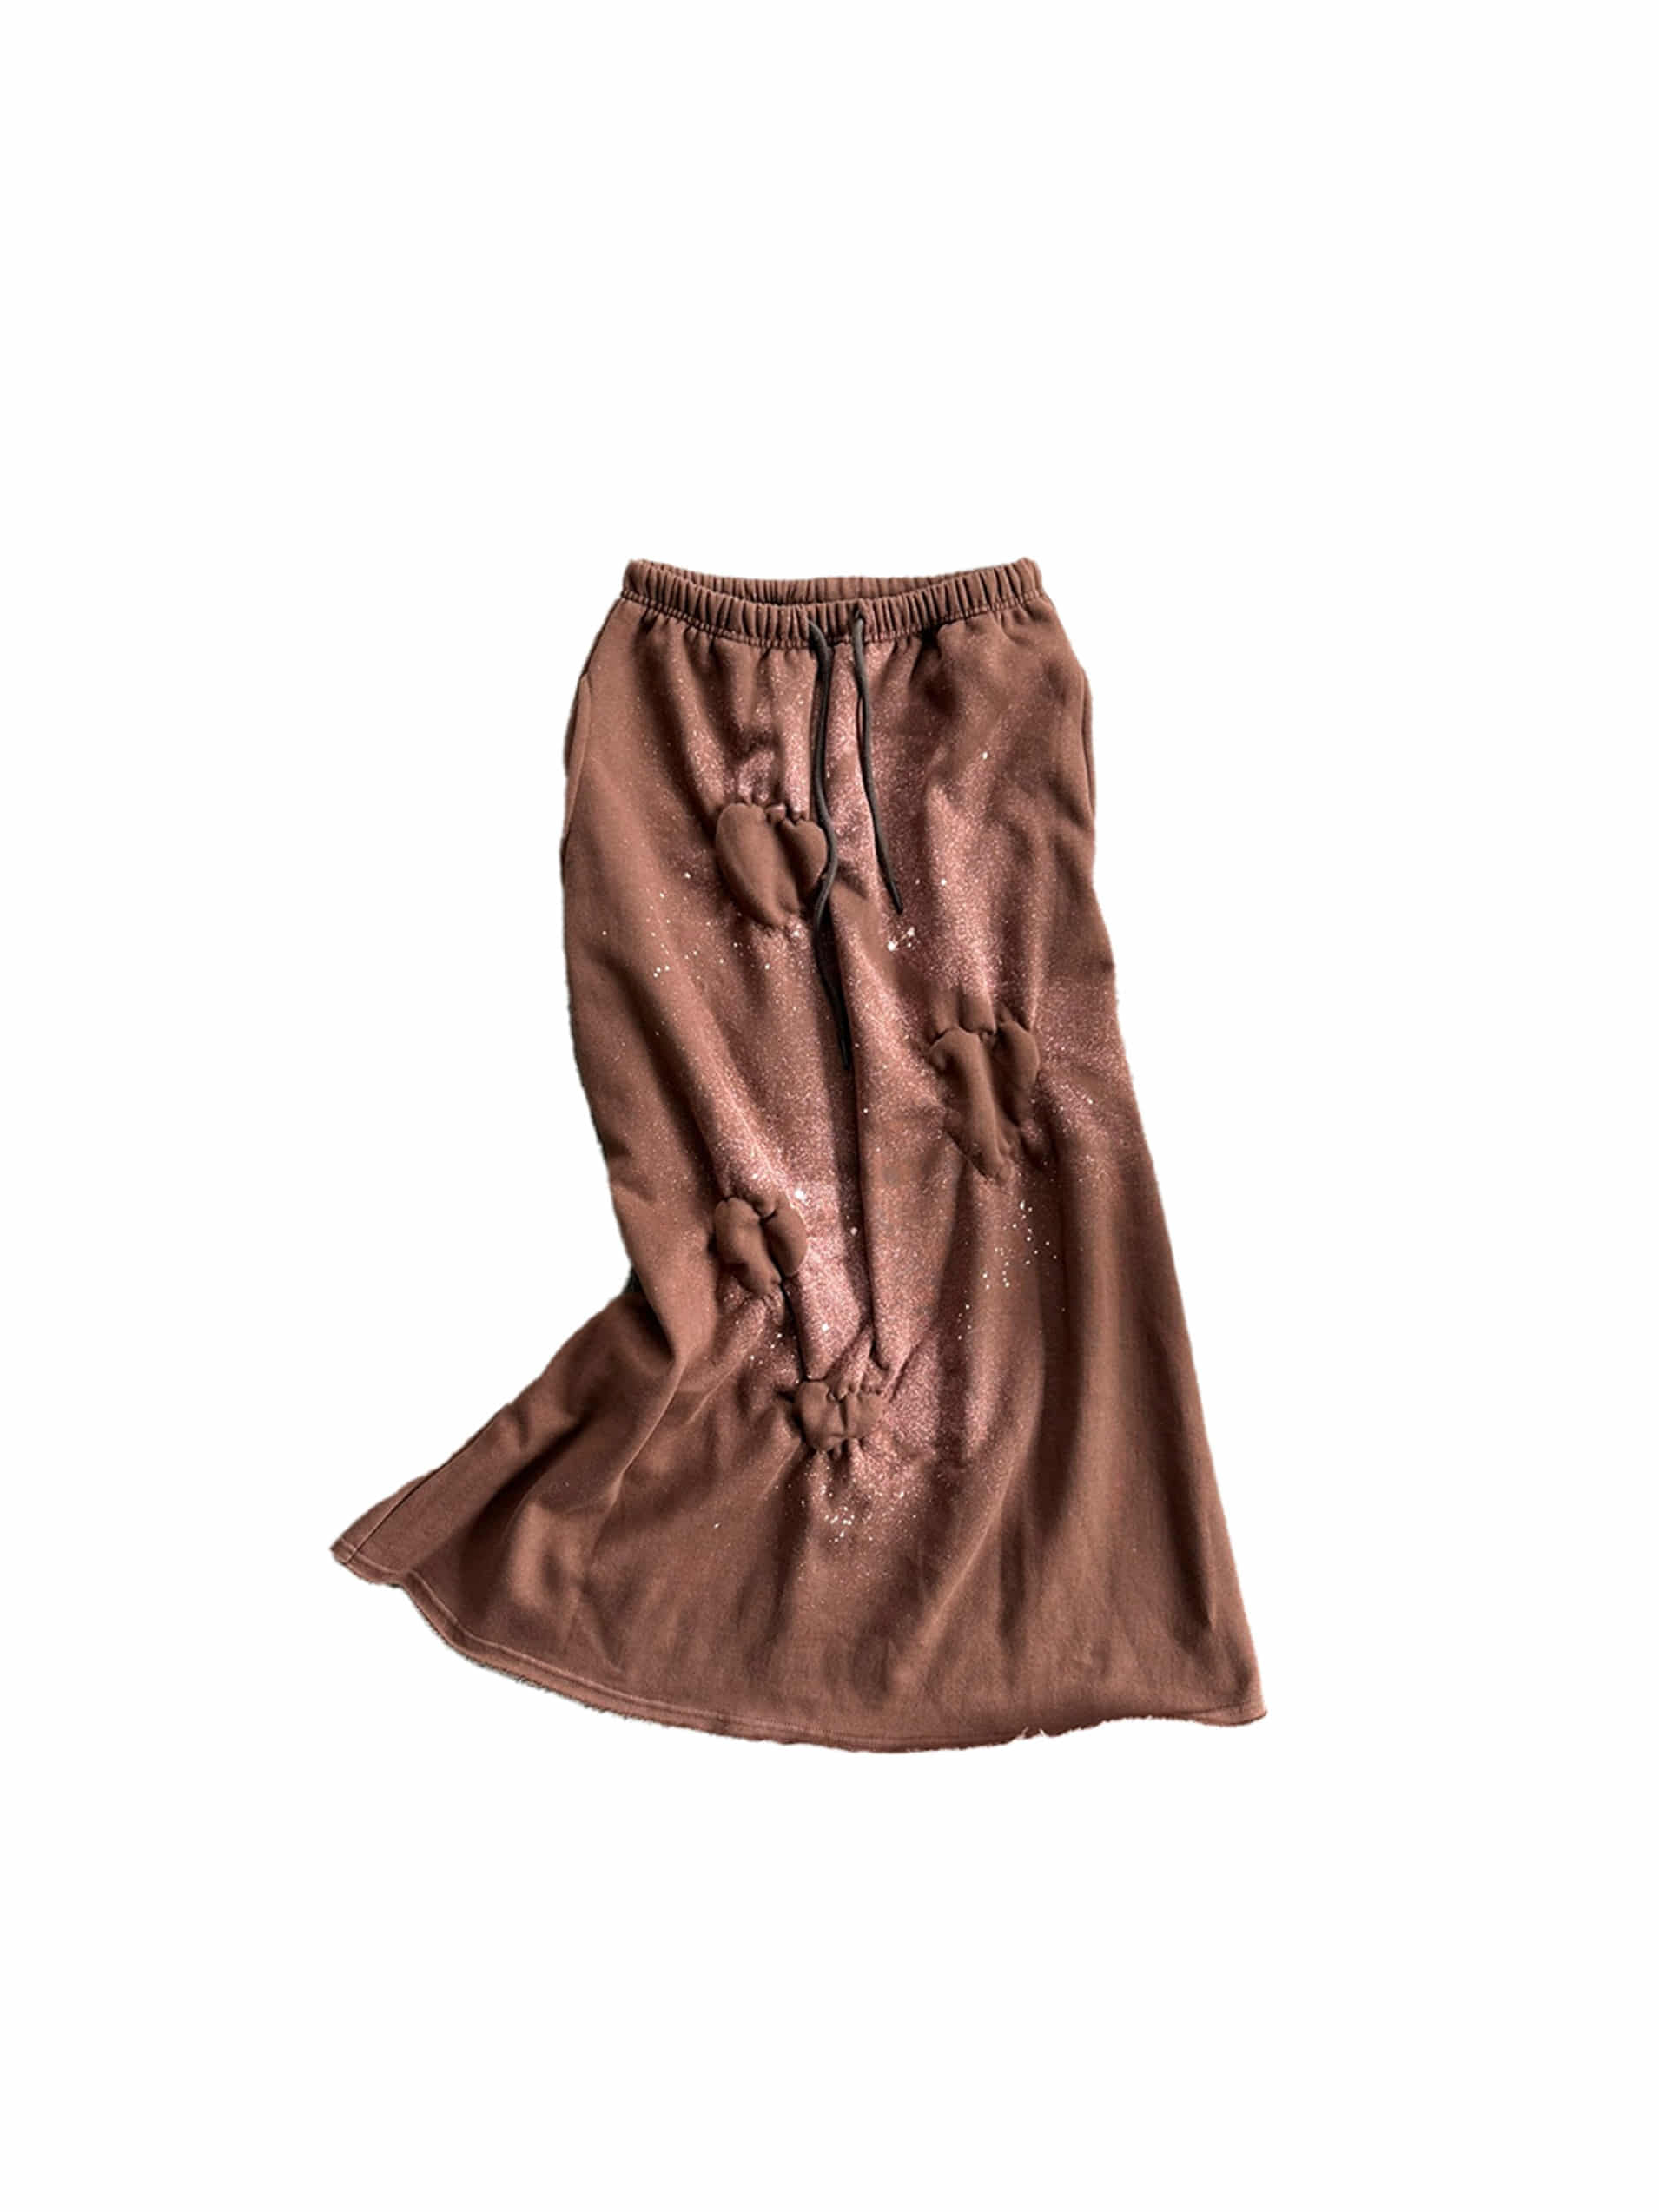 For Sunshine Moments Bleach Dying Sweat Skirt Brown